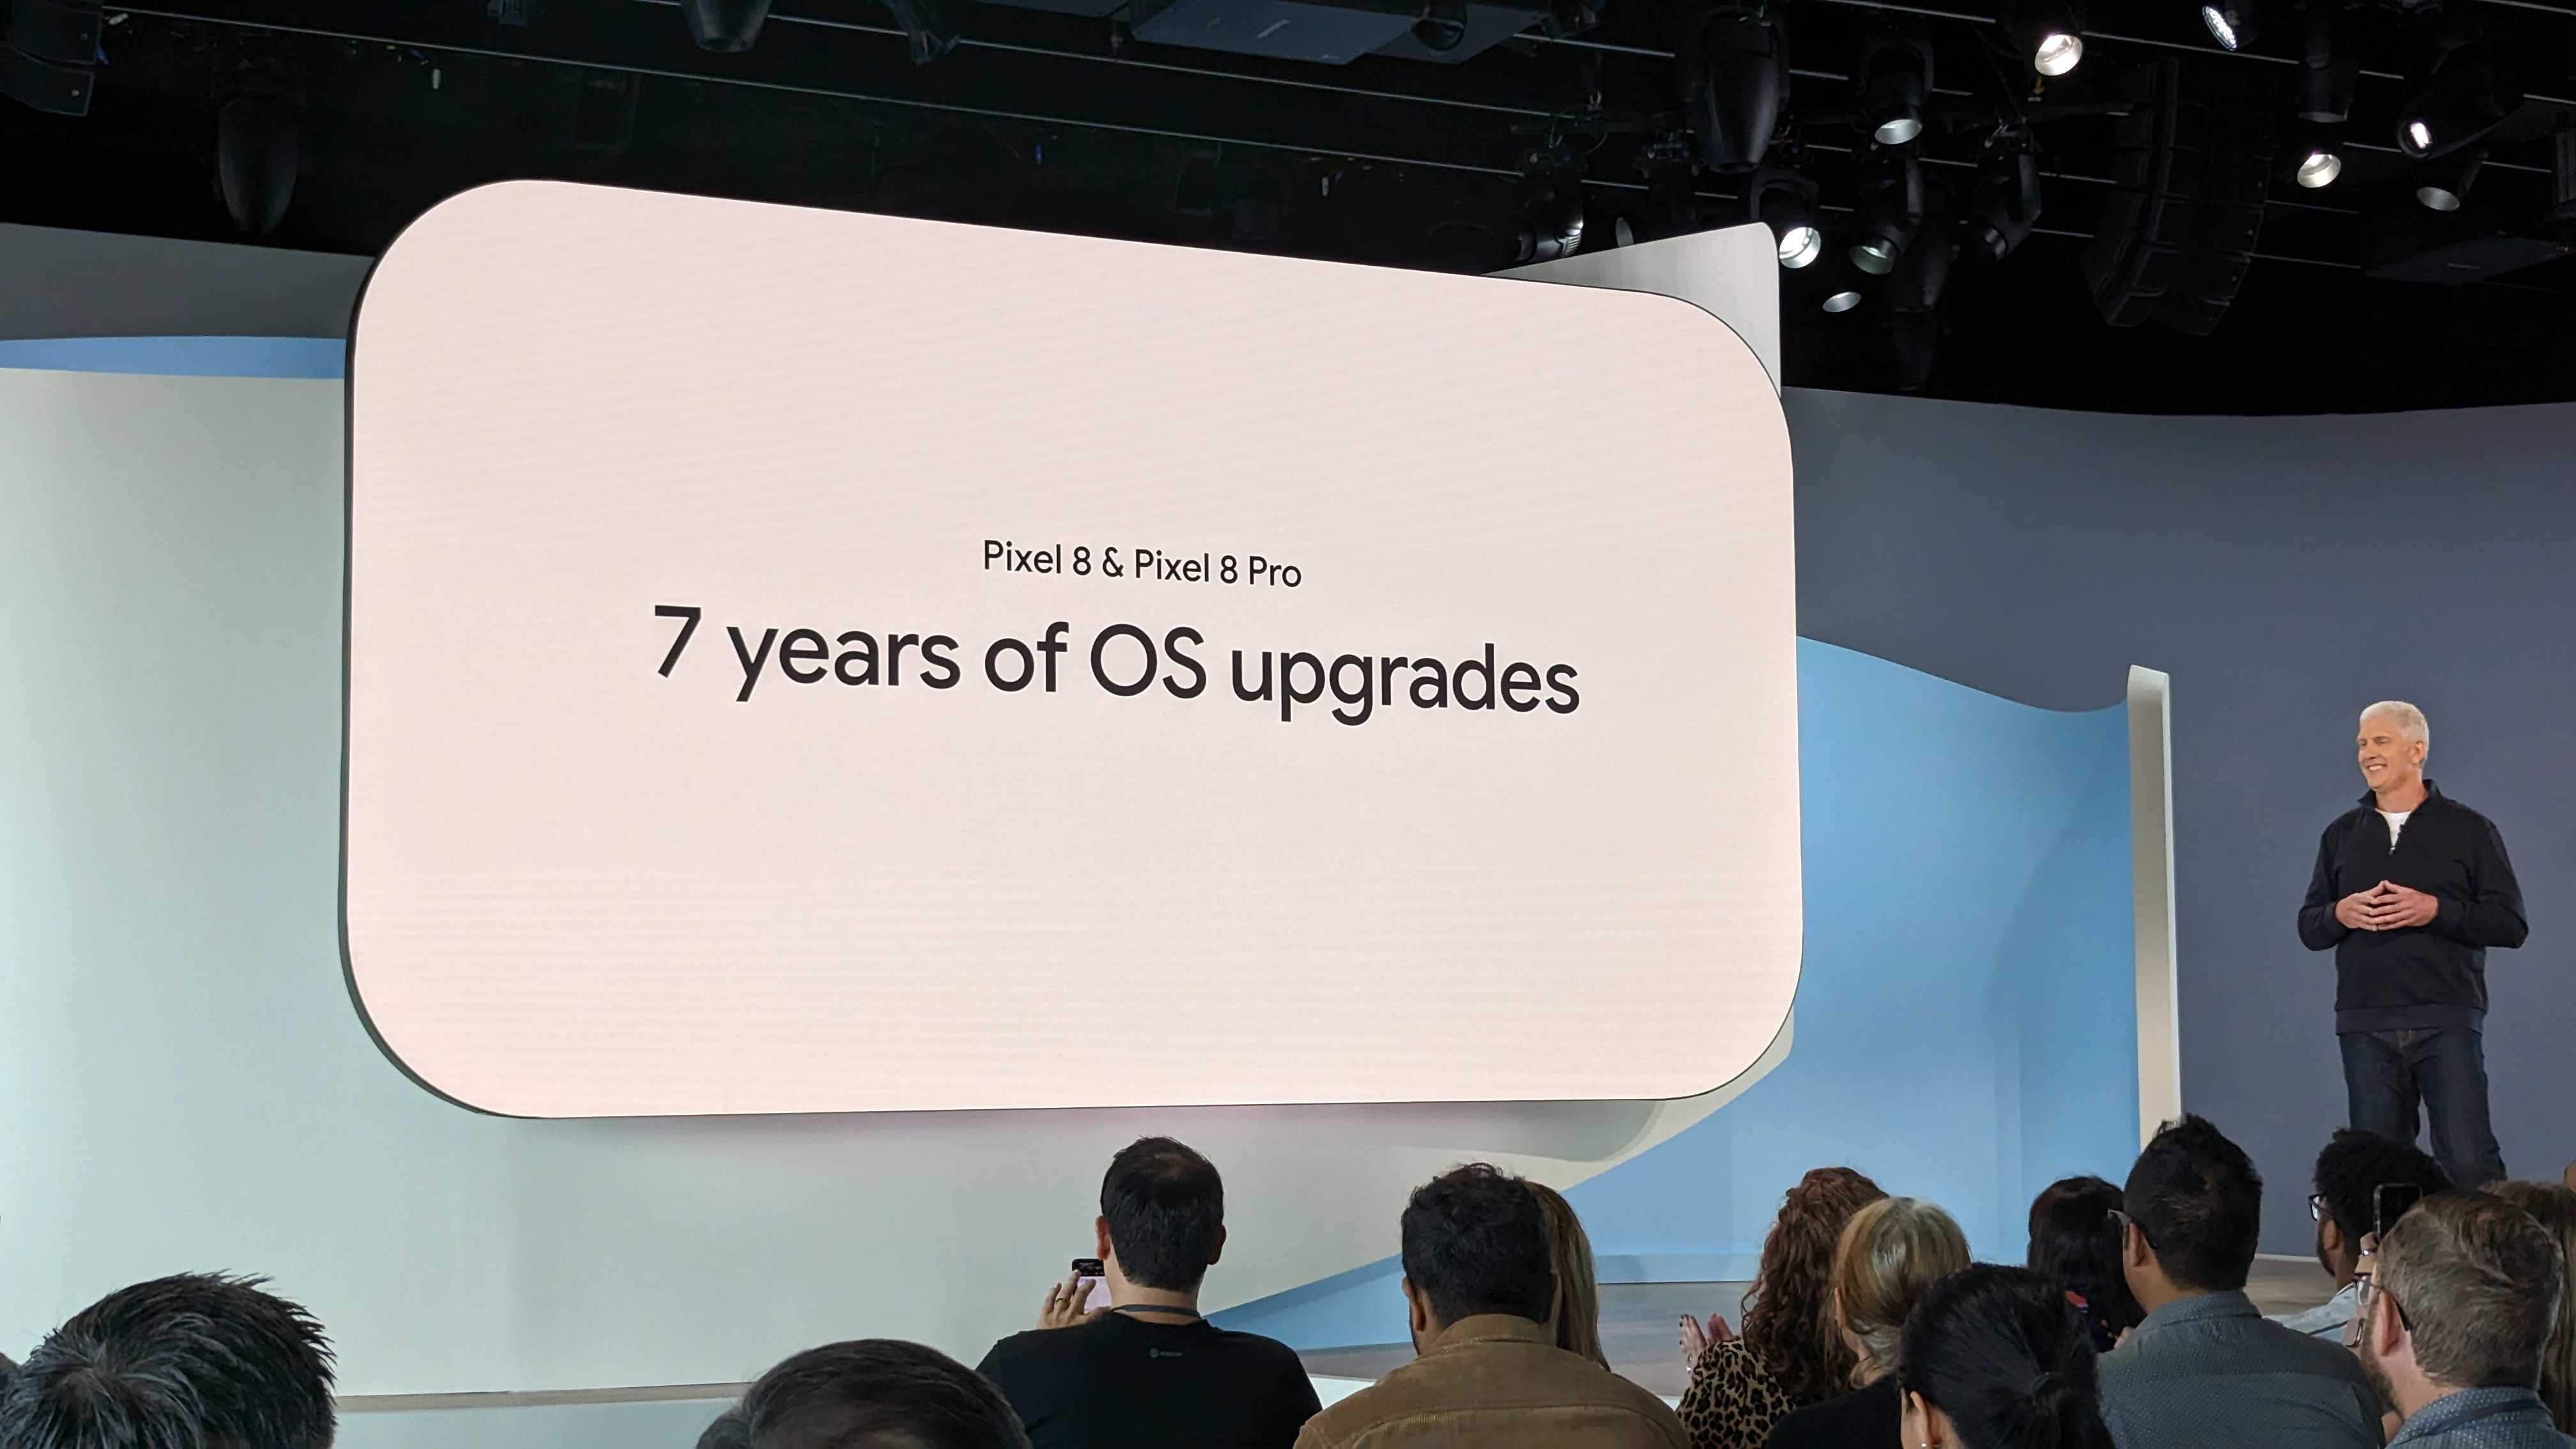 7 years of OS upgrades for Pixel 8 and Pixel 8 Pro